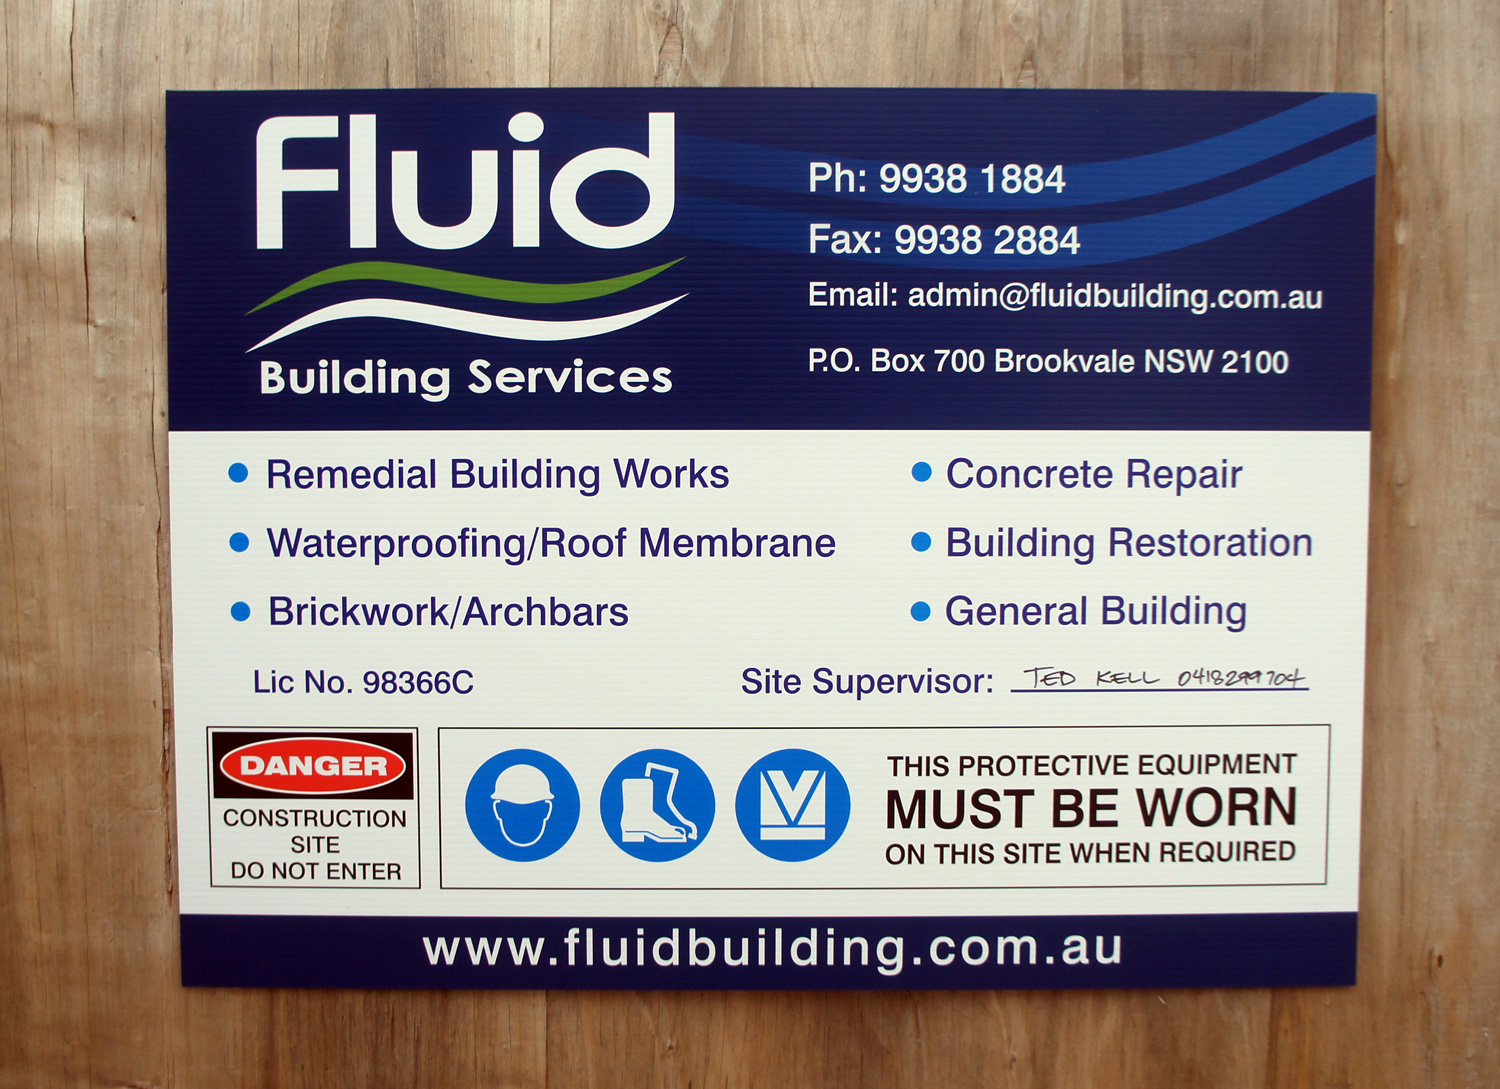 Building Site Signs, OH&S signage, Hybrid-Signs Northern beaches Building Site signs